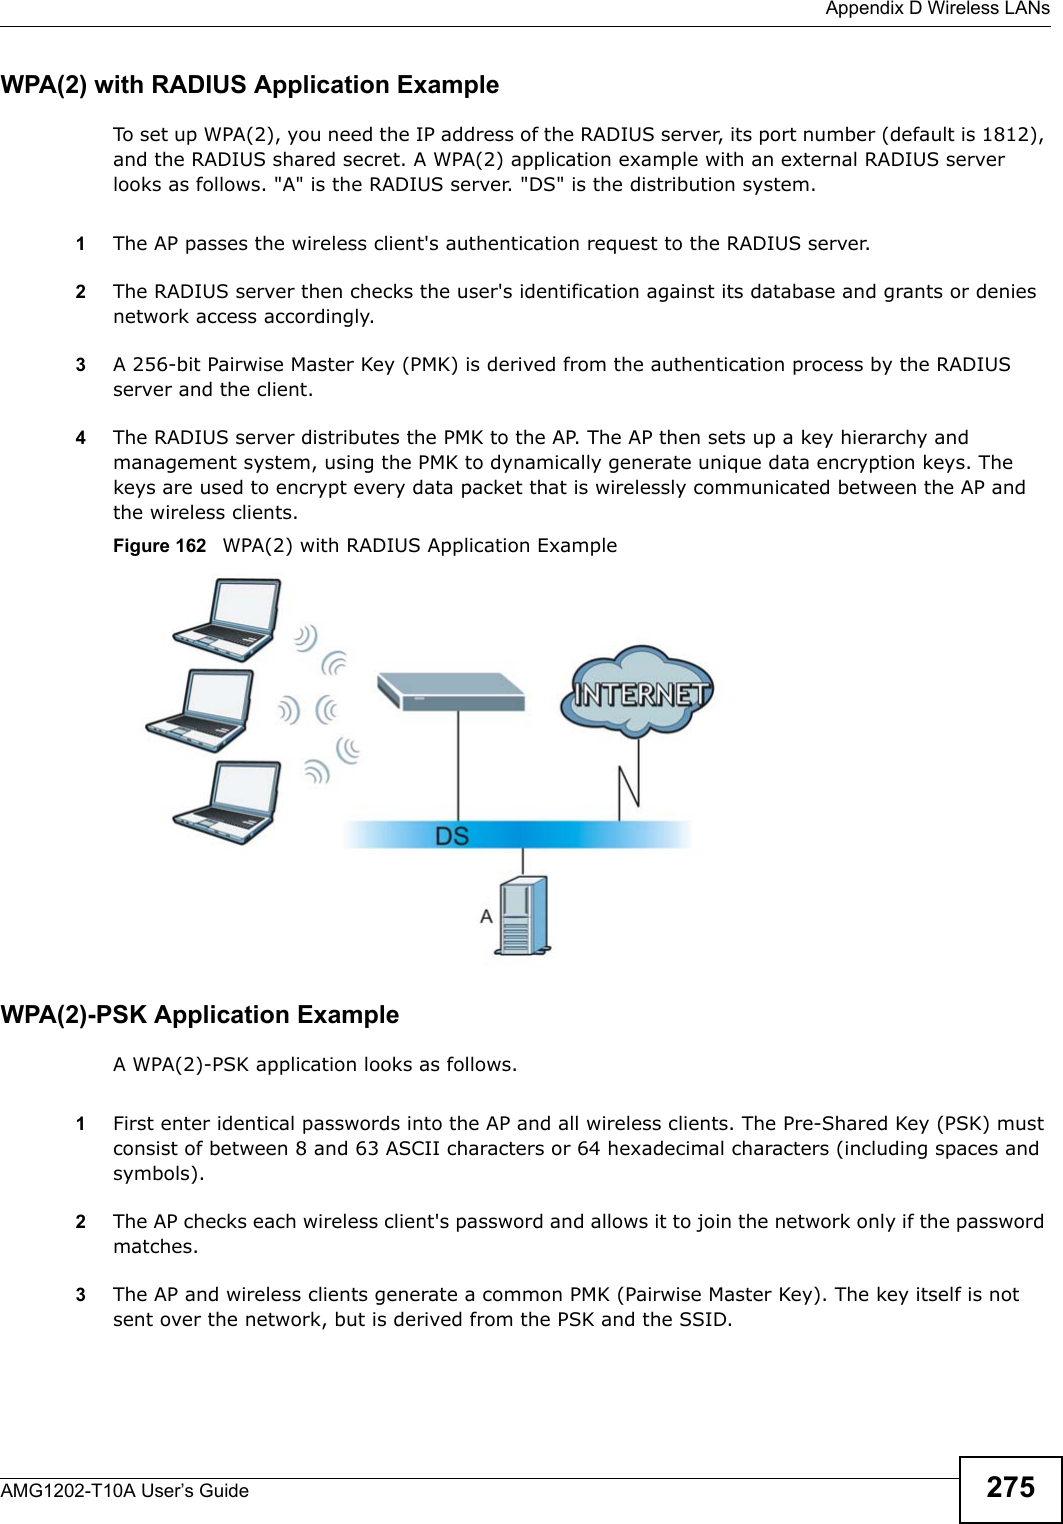  Appendix D Wireless LANsAMG1202-T10A User’s Guide 275WPA(2) with RADIUS Application ExampleTo set up WPA(2), you need the IP address of the RADIUS server, its port number (default is 1812), and the RADIUS shared secret. A WPA(2) application example with an external RADIUS server looks as follows. &quot;A&quot; is the RADIUS server. &quot;DS&quot; is the distribution system.1The AP passes the wireless client&apos;s authentication request to the RADIUS server.2The RADIUS server then checks the user&apos;s identification against its database and grants or denies network access accordingly.3A 256-bit Pairwise Master Key (PMK) is derived from the authentication process by the RADIUS server and the client.4The RADIUS server distributes the PMK to the AP. The AP then sets up a key hierarchy and management system, using the PMK to dynamically generate unique data encryption keys. The keys are used to encrypt every data packet that is wirelessly communicated between the AP and the wireless clients.Figure 162   WPA(2) with RADIUS Application ExampleWPA(2)-PSK Application ExampleA WPA(2)-PSK application looks as follows.1First enter identical passwords into the AP and all wireless clients. The Pre-Shared Key (PSK) must consist of between 8 and 63 ASCII characters or 64 hexadecimal characters (including spaces and symbols).2The AP checks each wireless client&apos;s password and allows it to join the network only if the password matches.3The AP and wireless clients generate a common PMK (Pairwise Master Key). The key itself is not sent over the network, but is derived from the PSK and the SSID. 